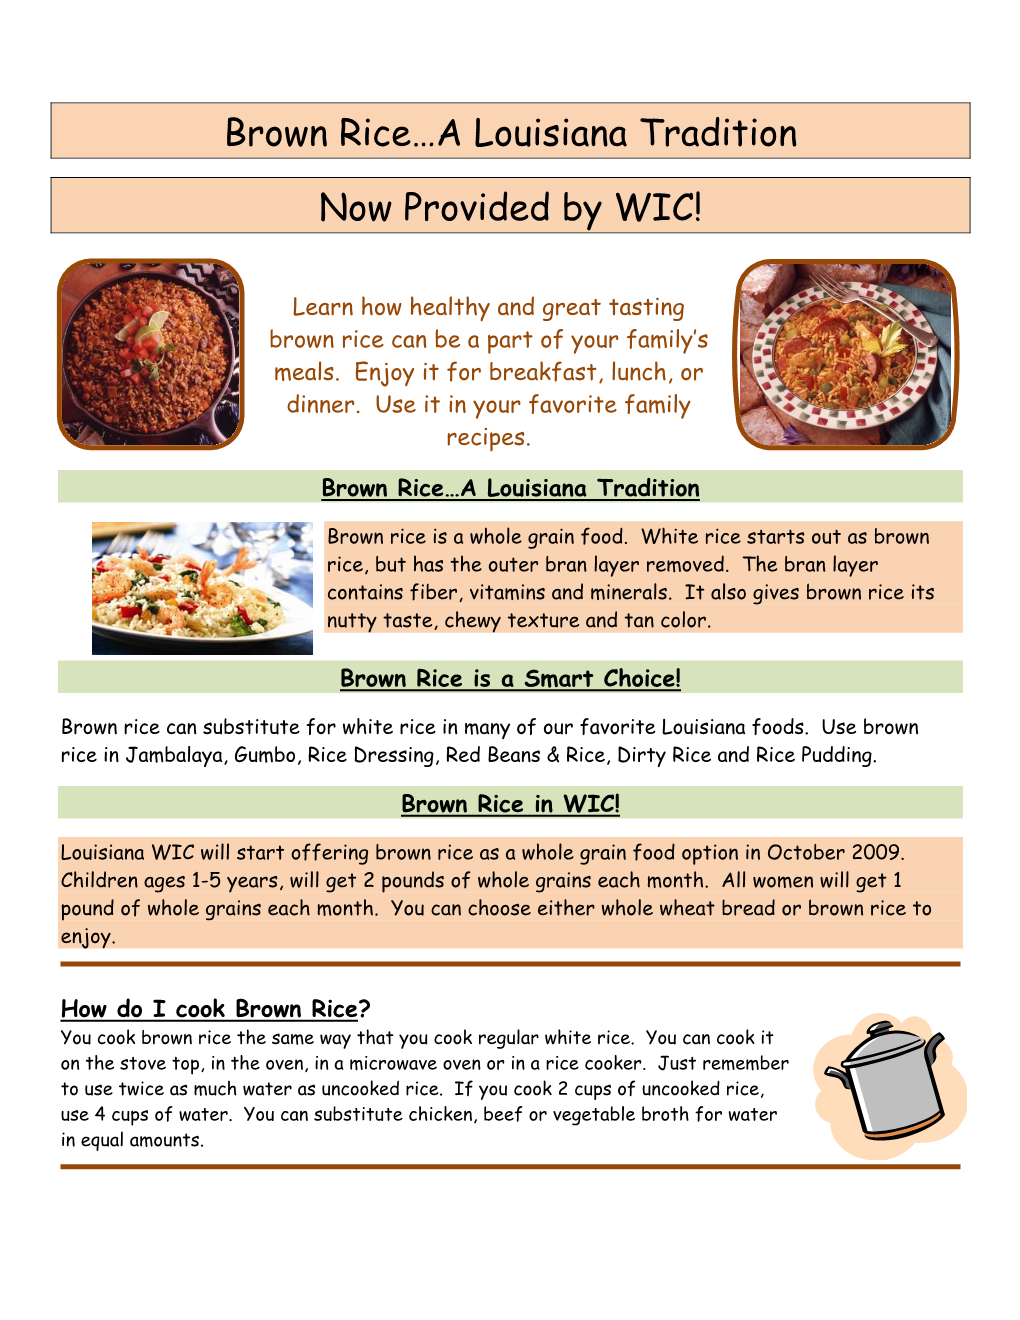 Brown Rice…A Louisiana Tradition Now Provided by WIC!